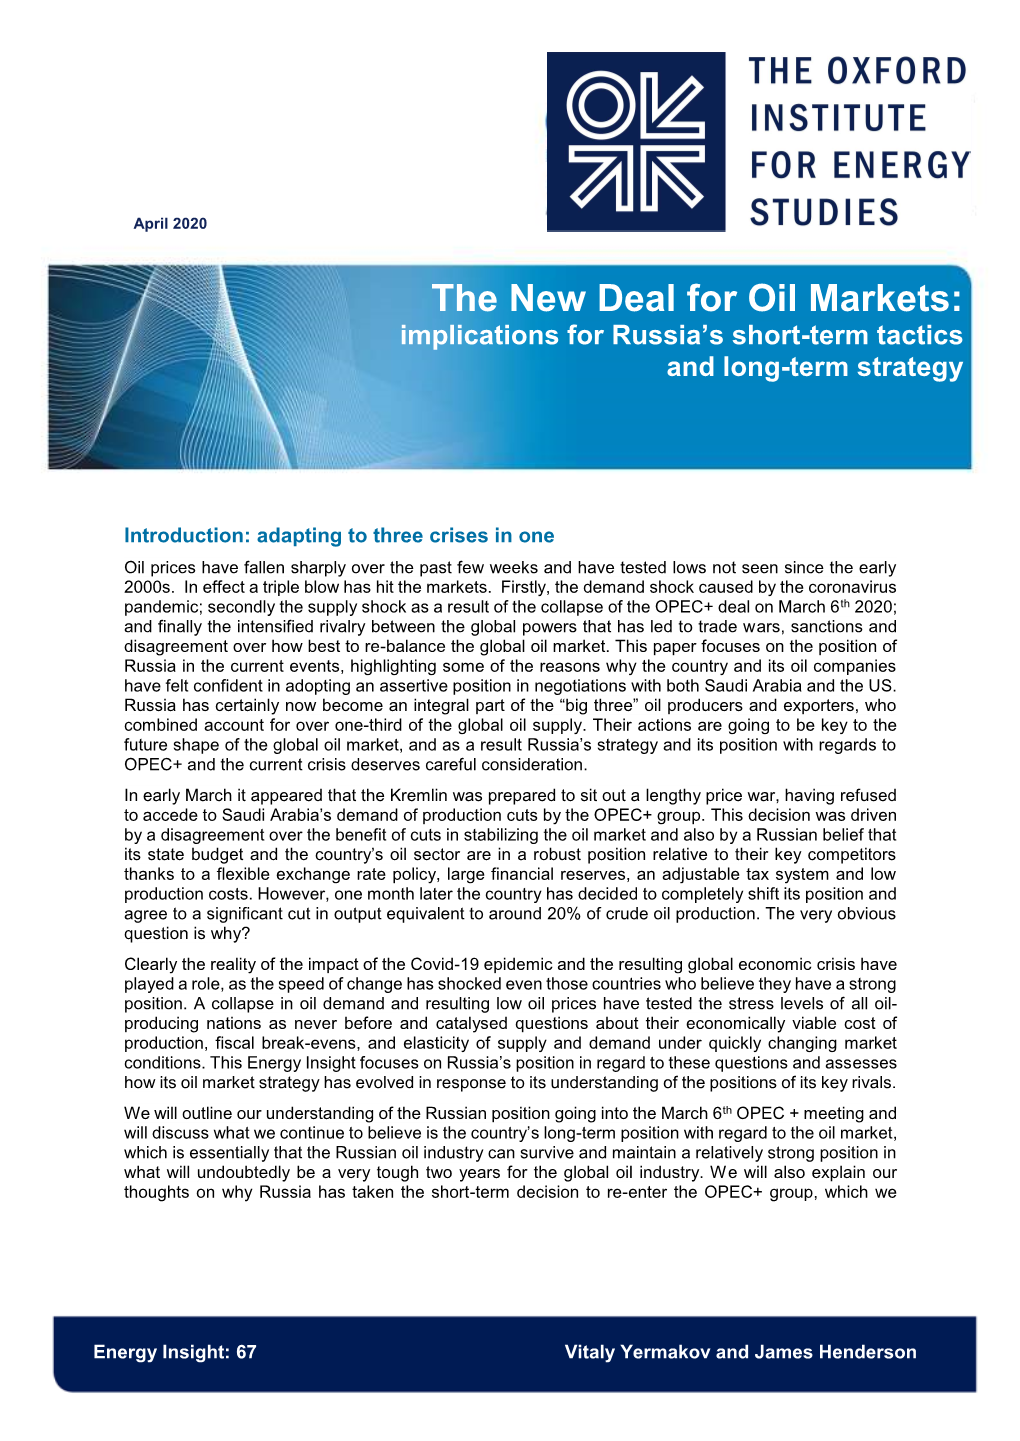 The New Deal for Oil Markets: Implications for Russia’S Short-Term Tactics and Long-Term Strategy